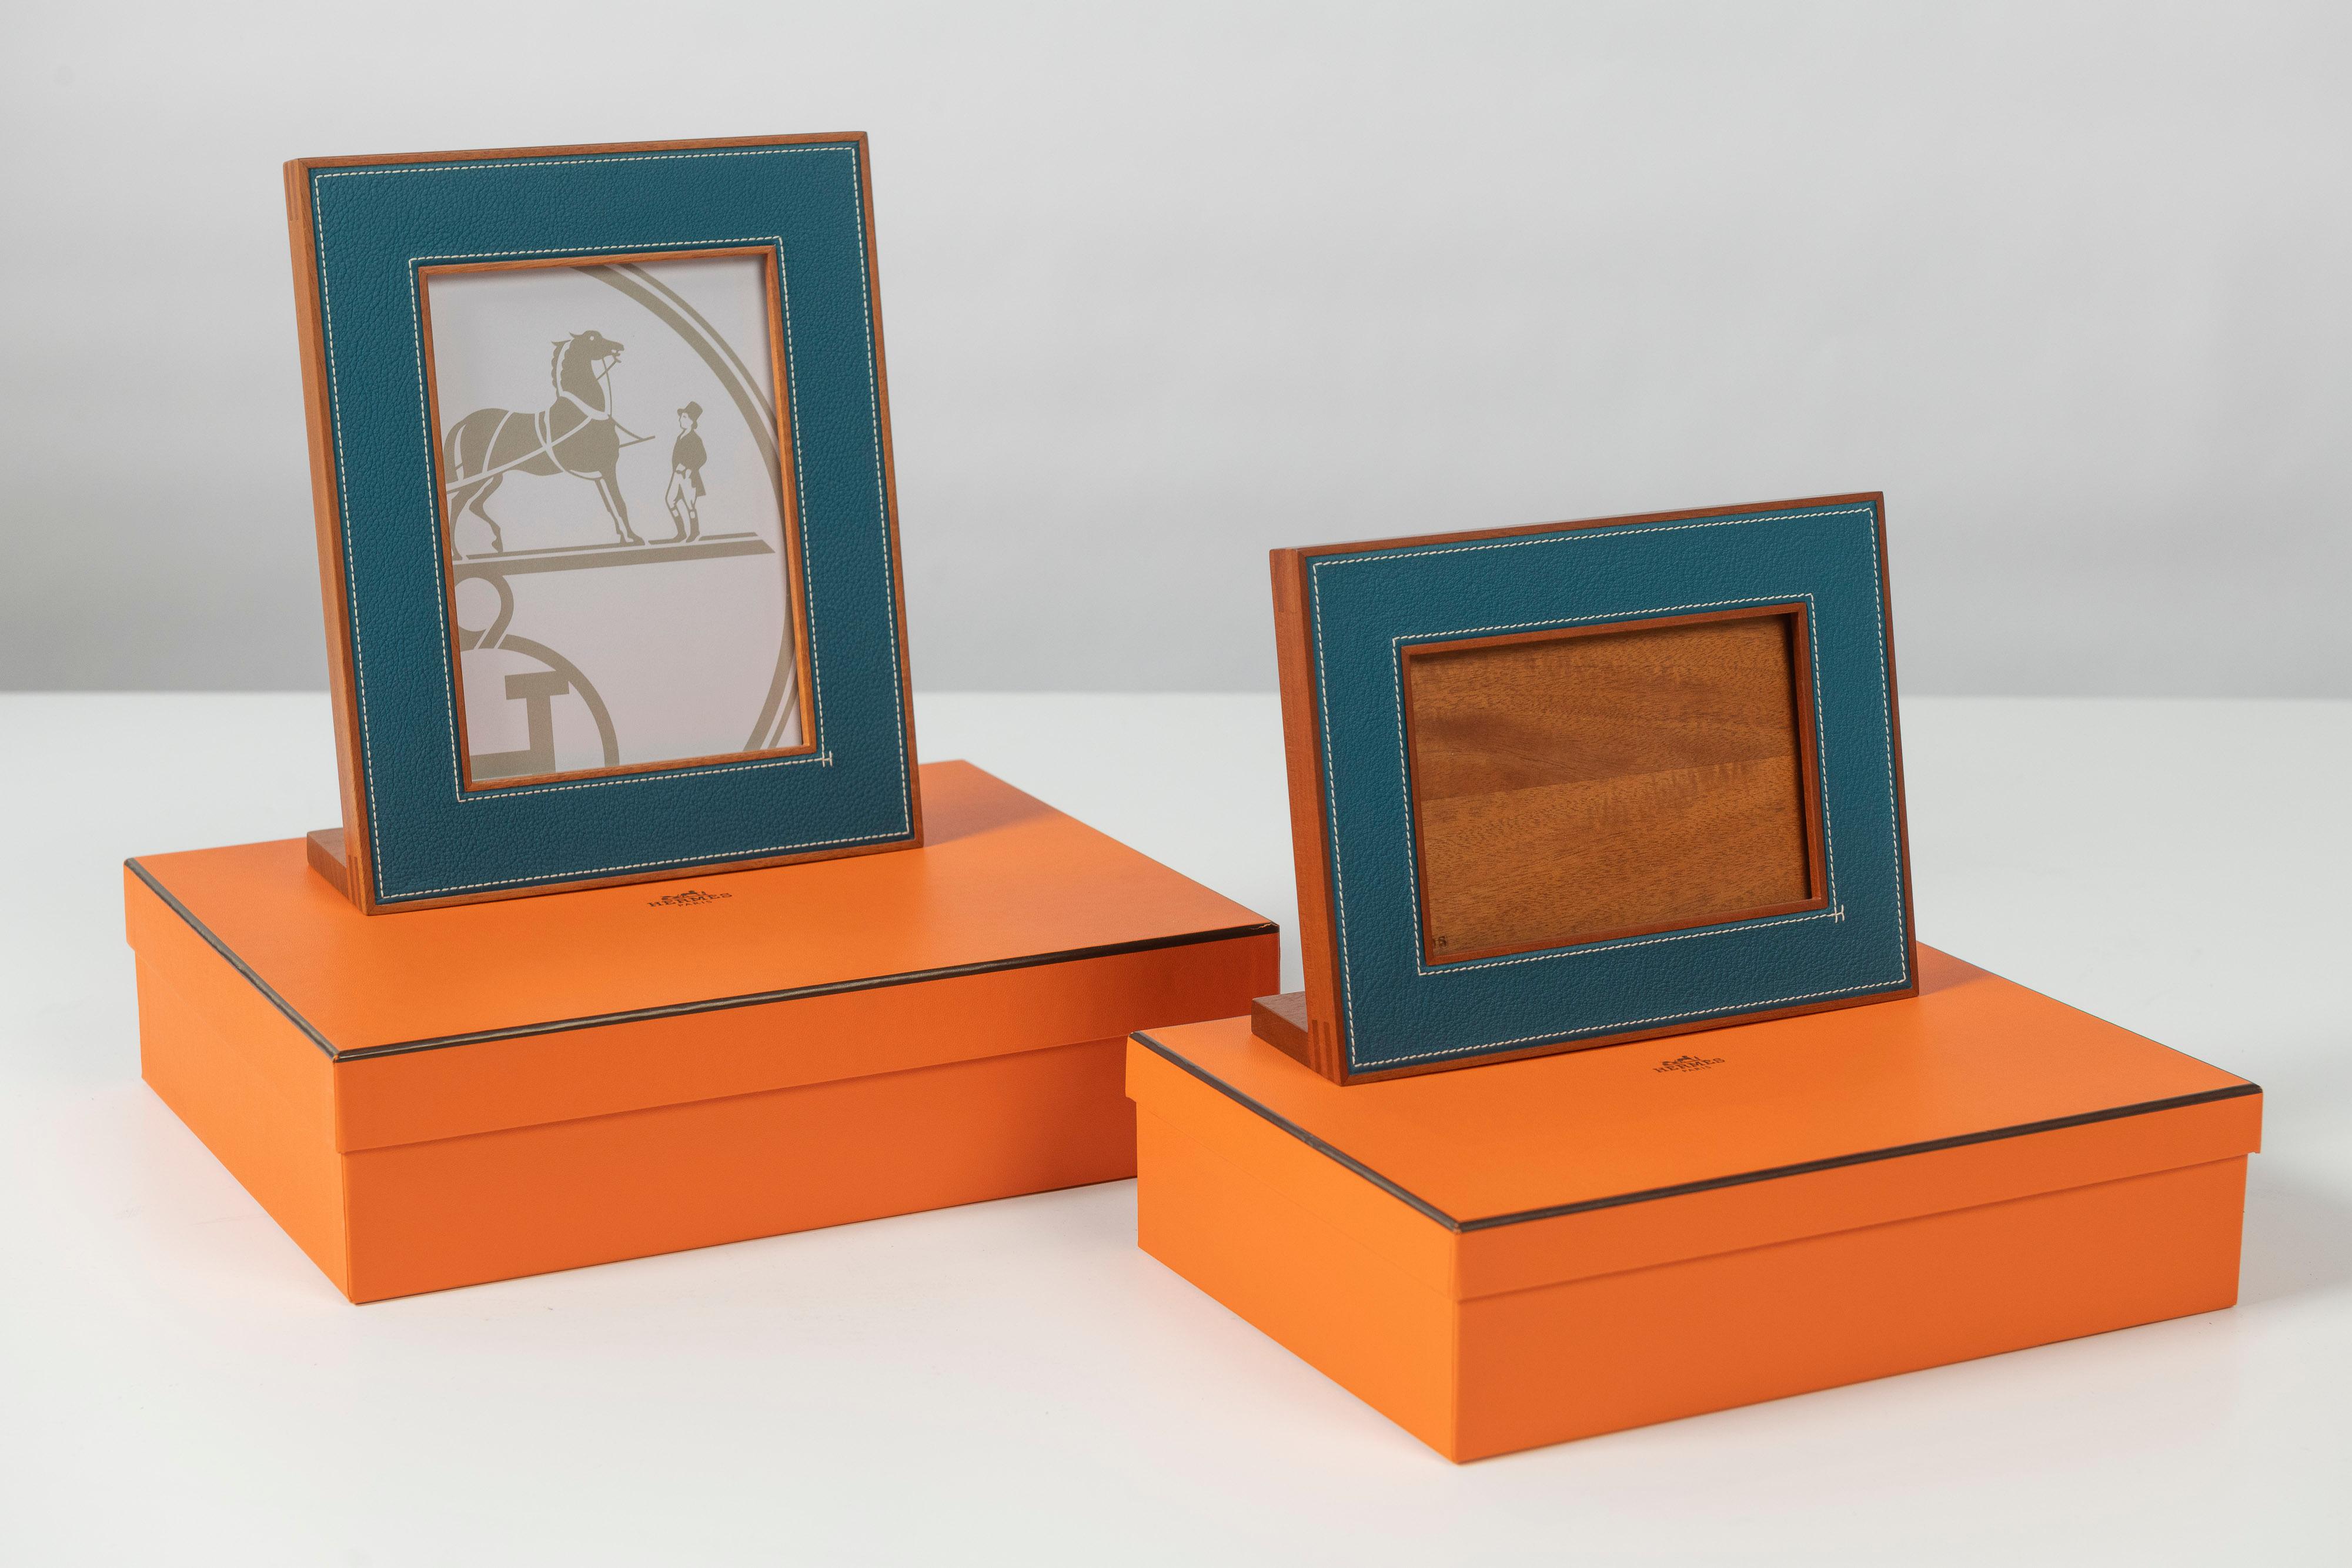 Glass Two Hermes Pleiade Picture Frames in Saddle Stitched Smooth Taurillon Leather